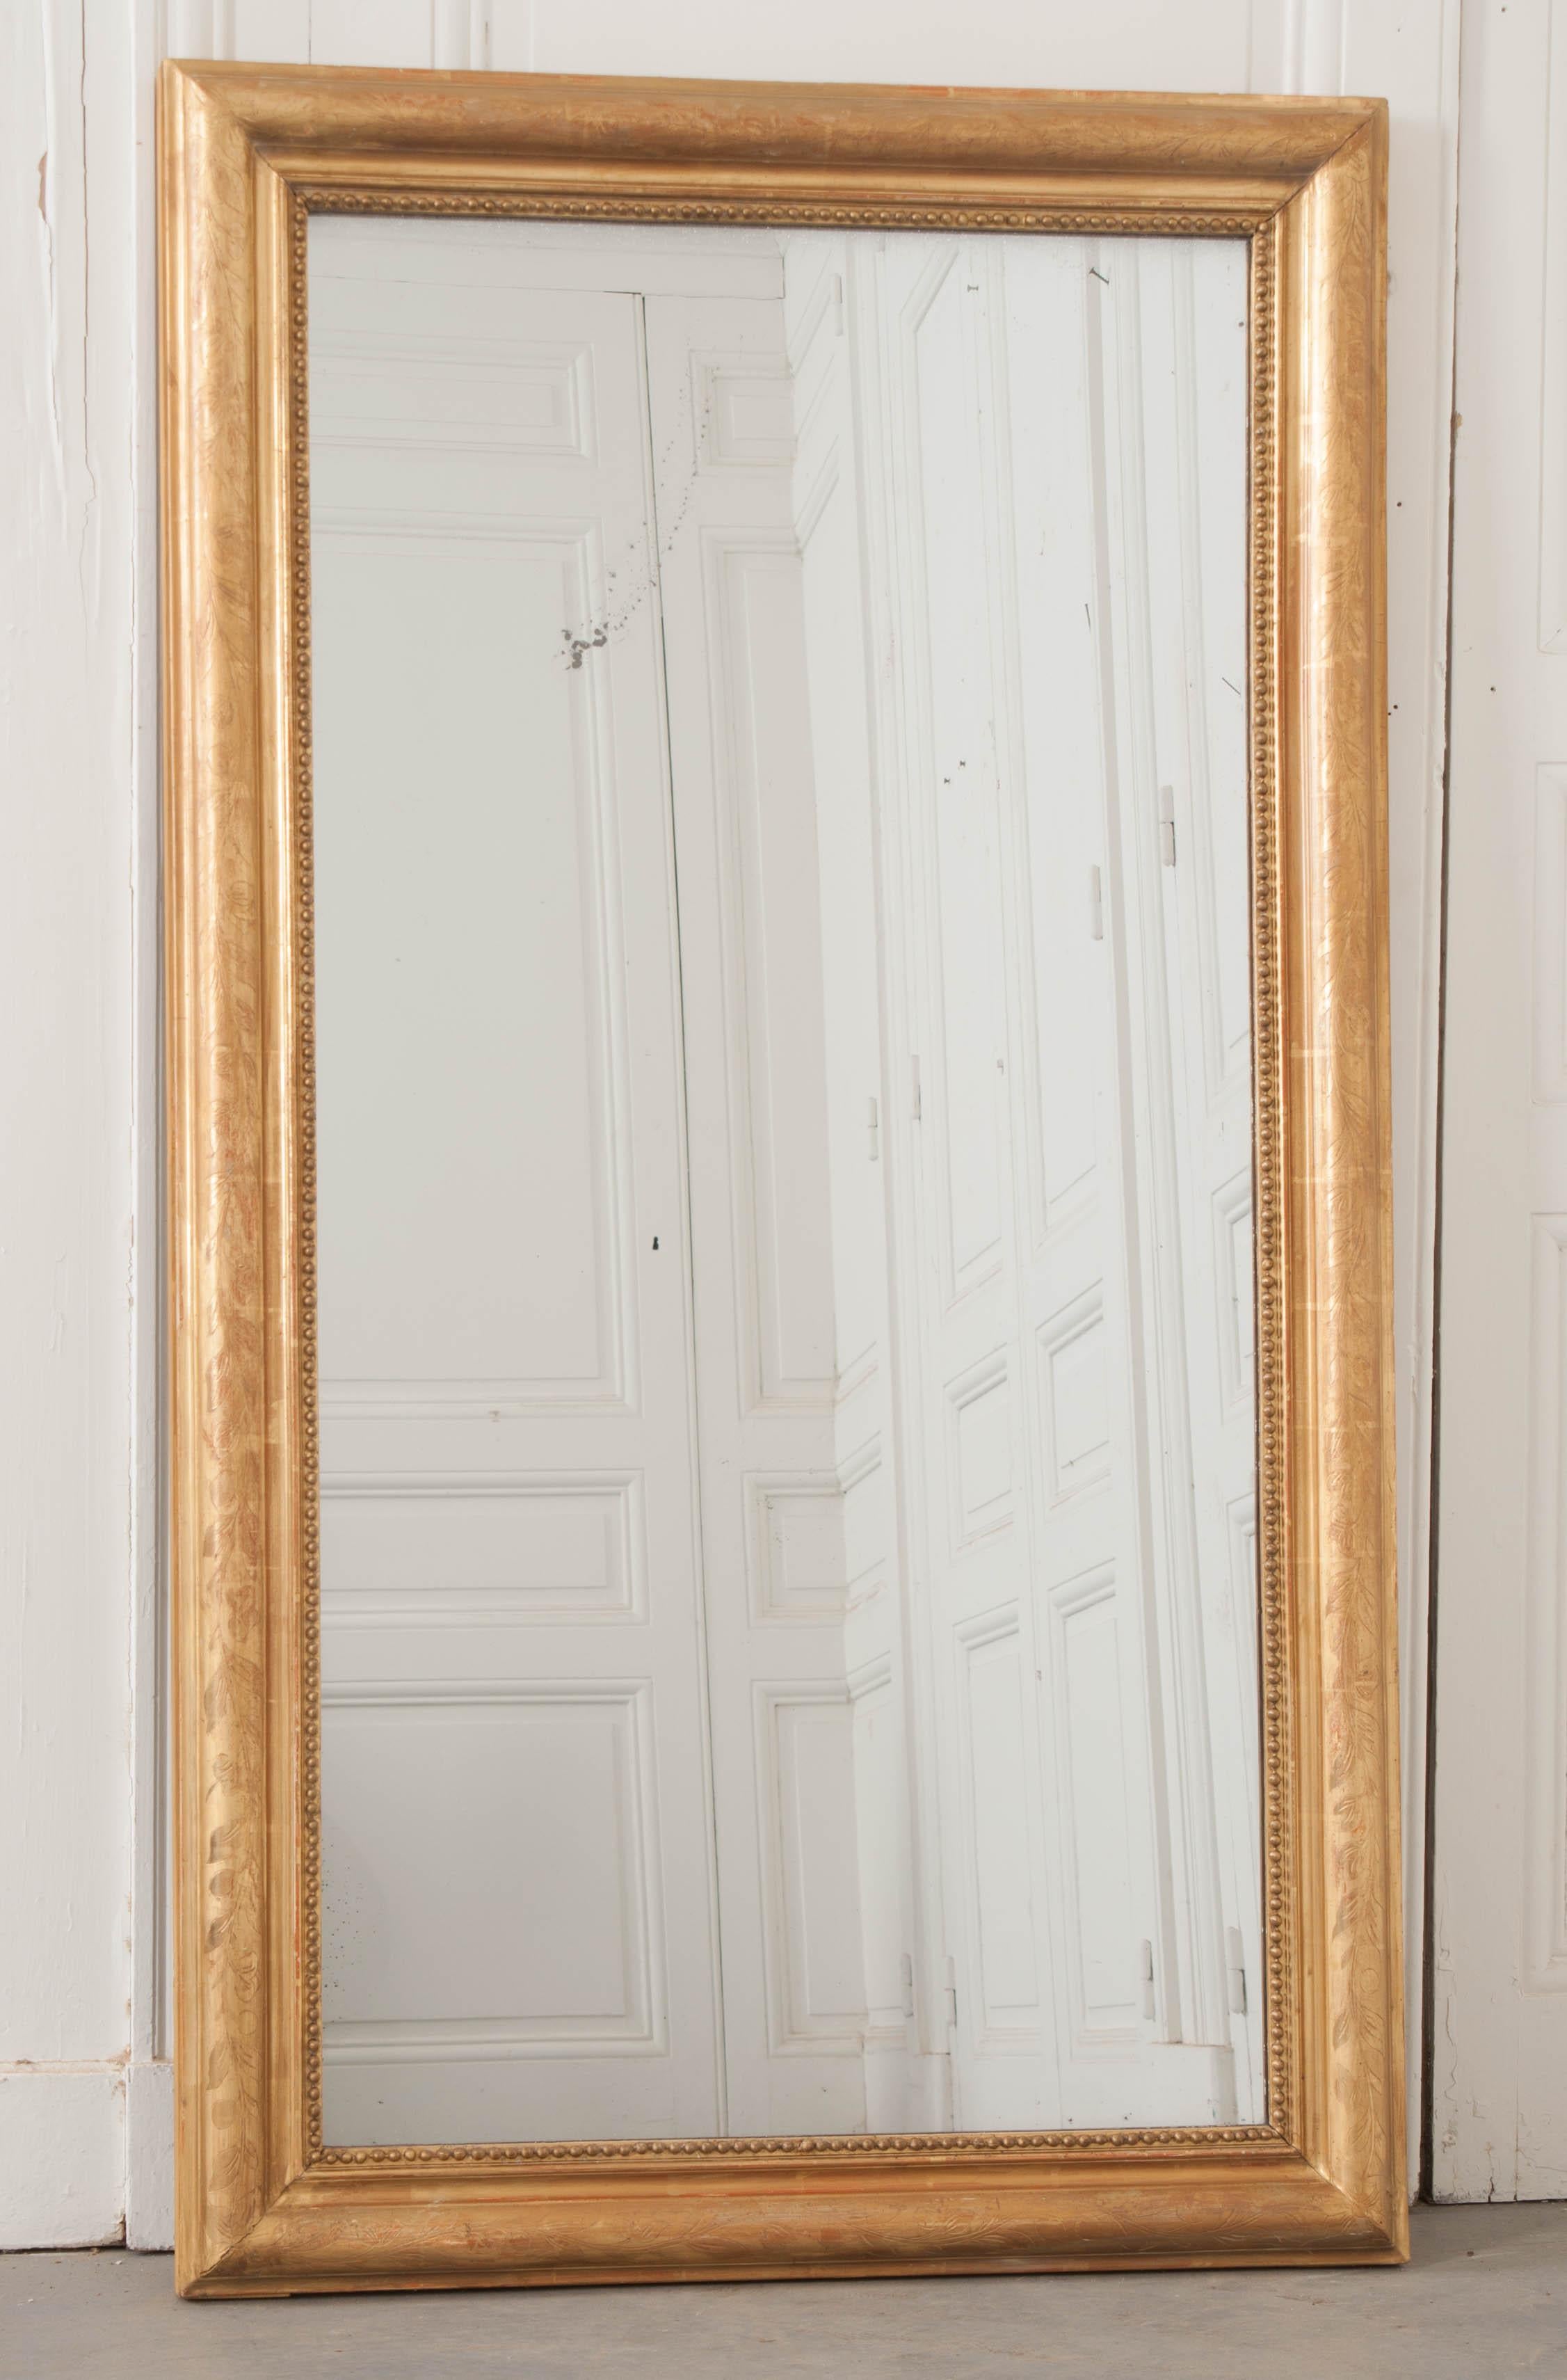 Simple flower motif is etched on all sides of this gold gilt, symmetrical mirror. The frame surrounds its original mirror glass which has light foxing and crystallization throughout, circa 1820s.